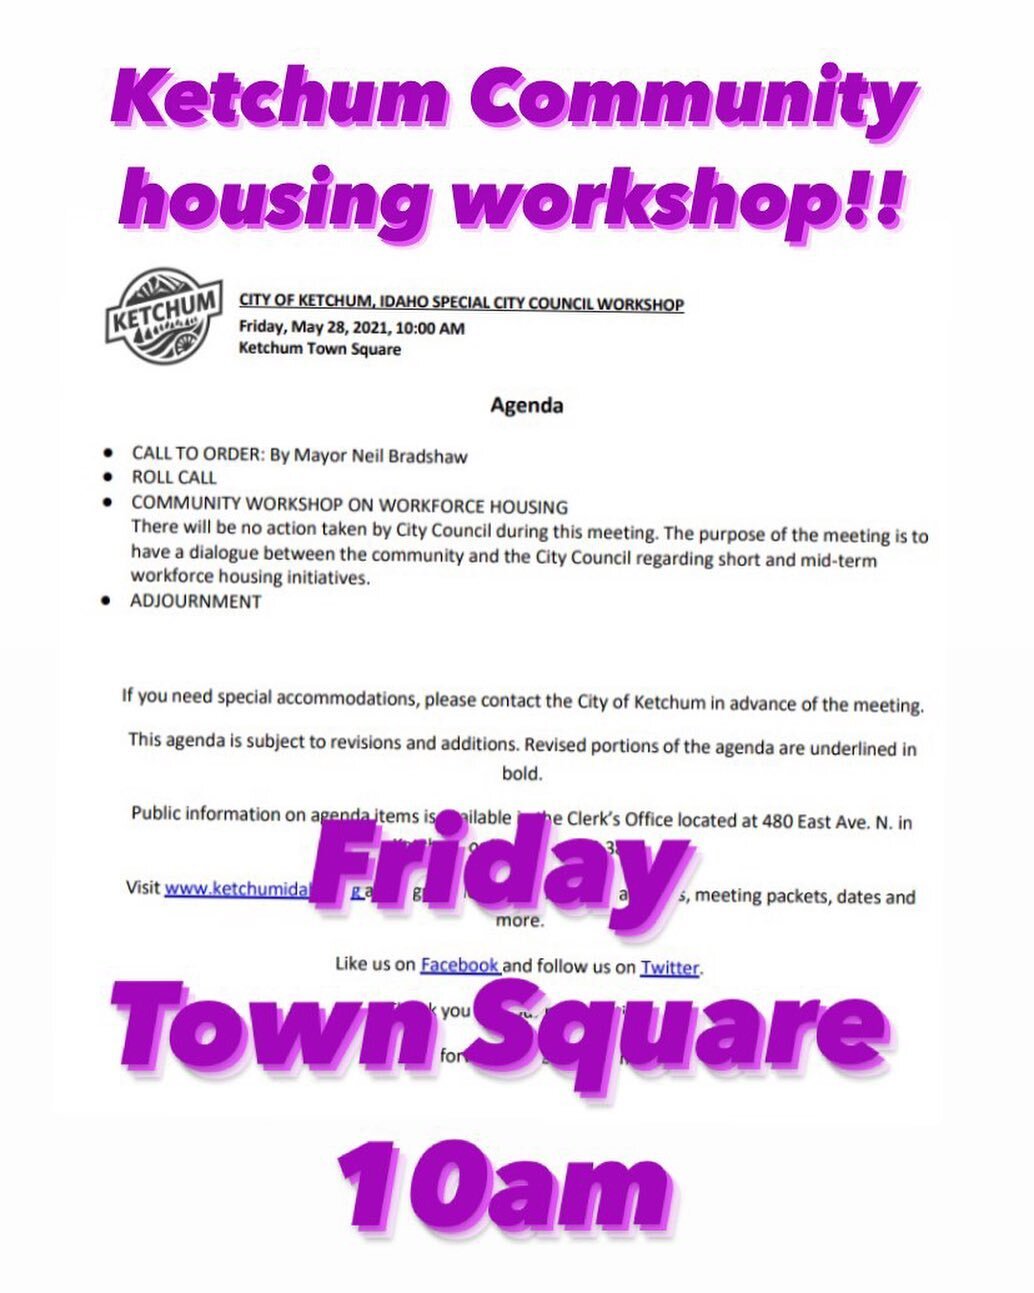 Please attend this workshop so we can hopefully have some affordable housing!!